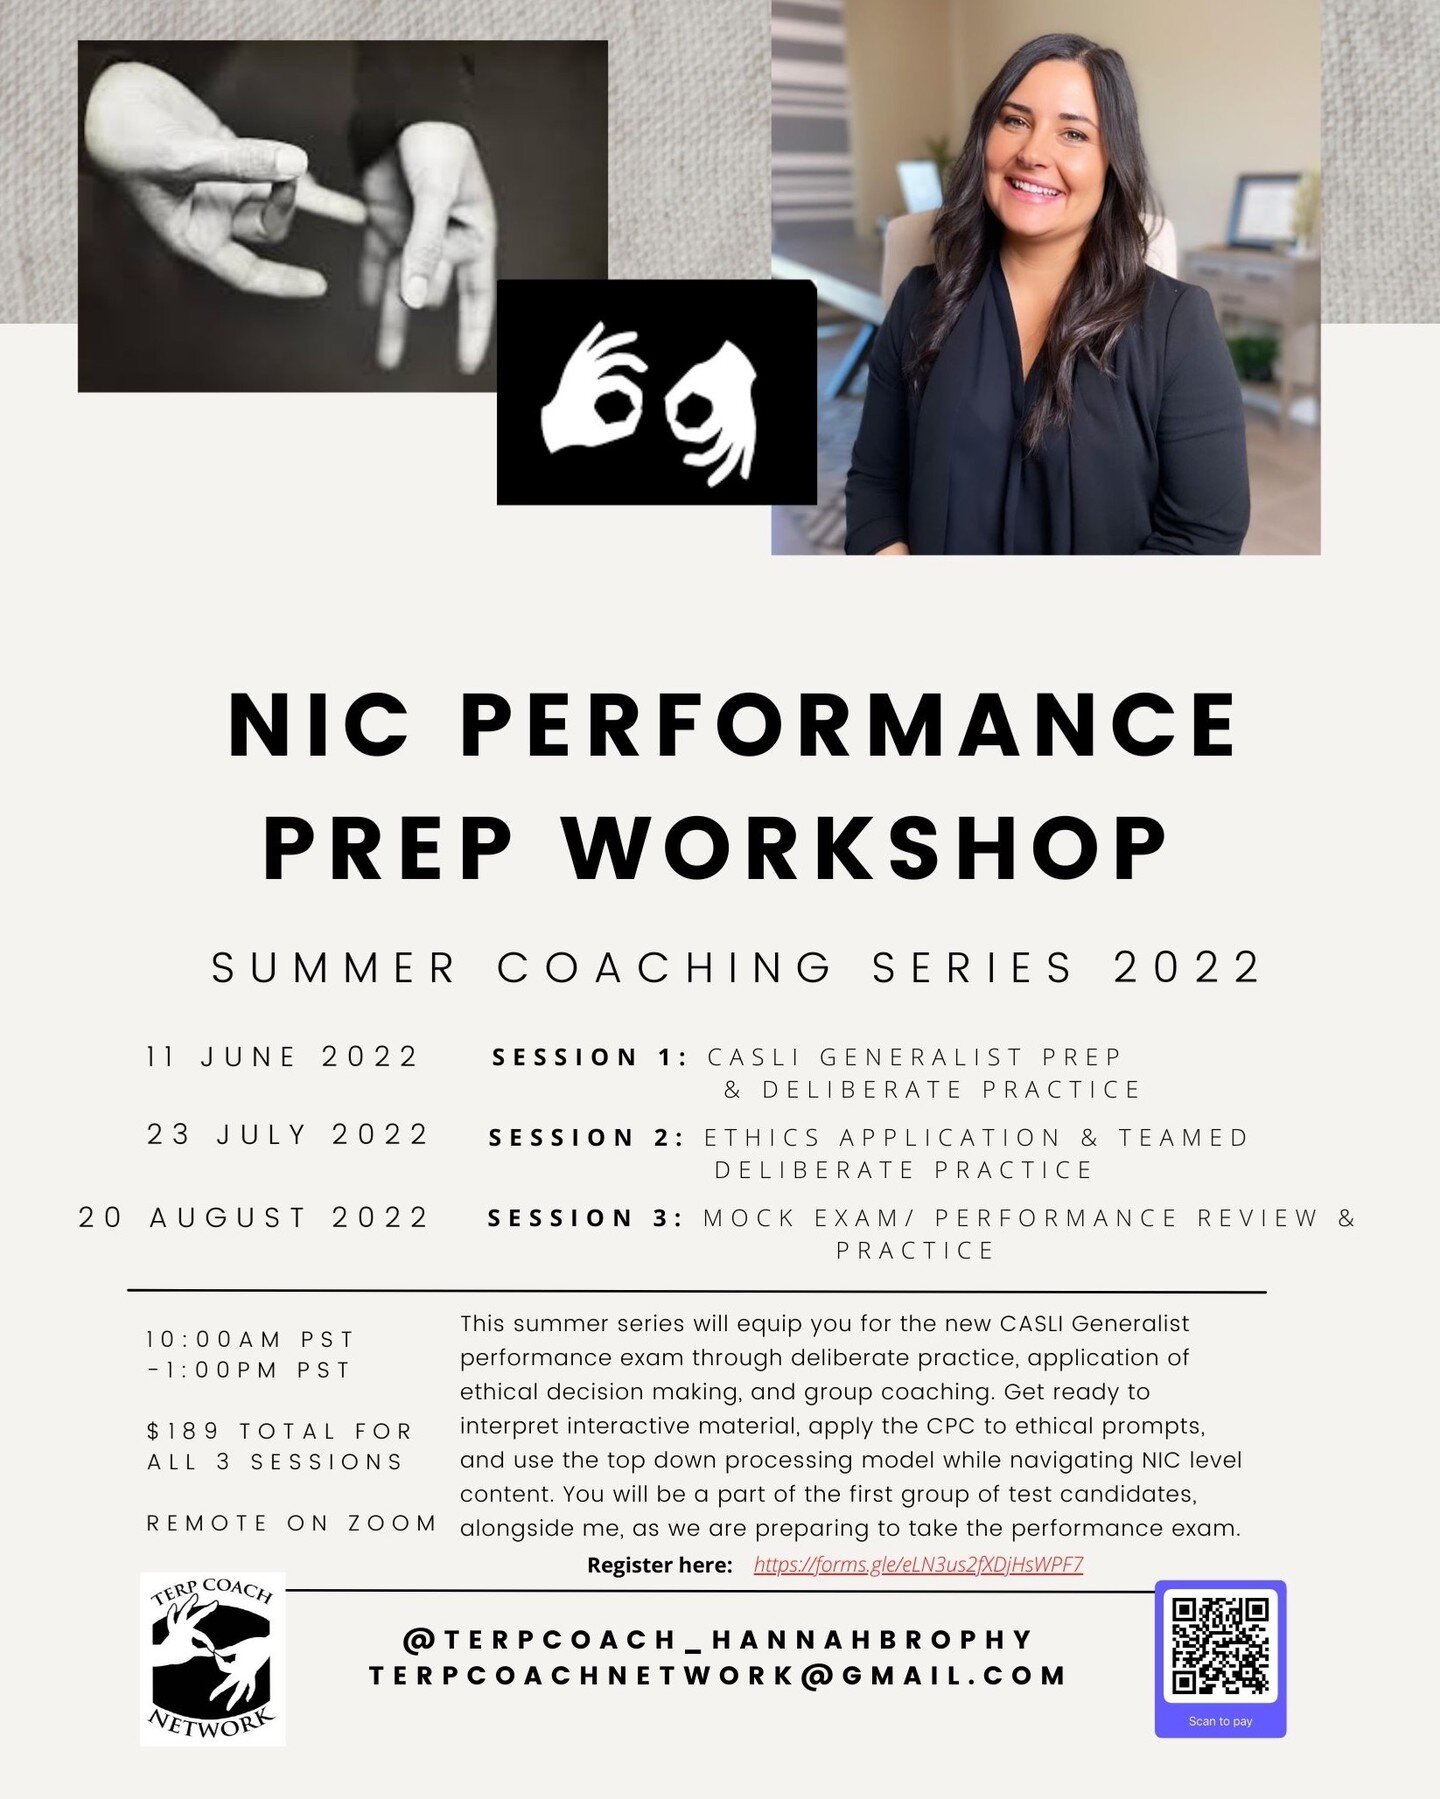 Getting ready for the CASLI Generalist Performance exam? Yeah me too...join me as I prepare to take the performance exam this fall! Hands up practice, timed ethical evaluations, and direct coaching to get you READY for it! Join me!